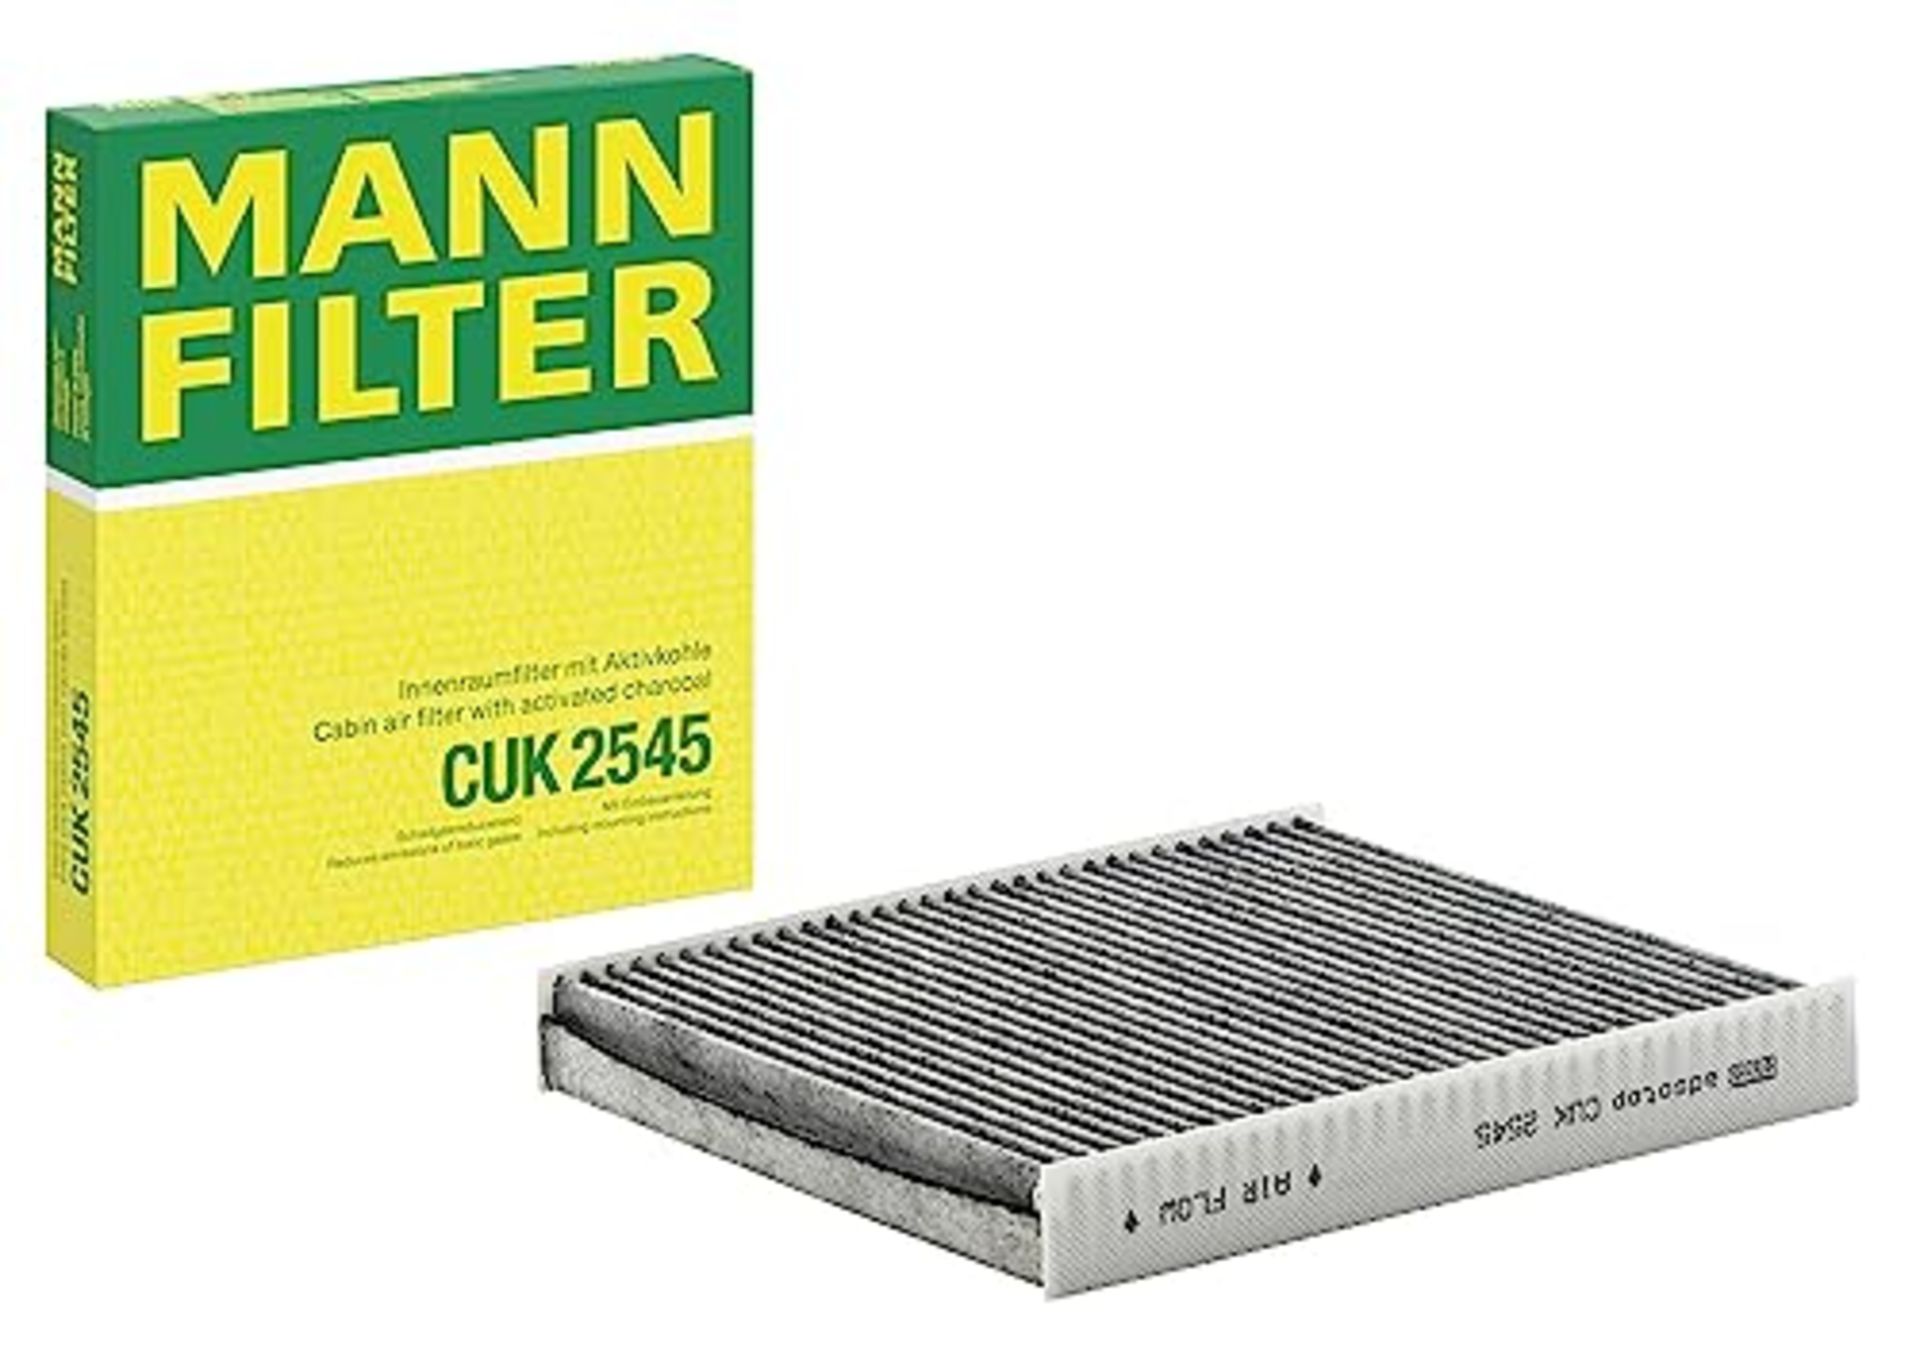 MANN-FILTER CUK 2545 Interior Filter - Pollen Filter with Activated Carbon - For Cars - Image 4 of 6